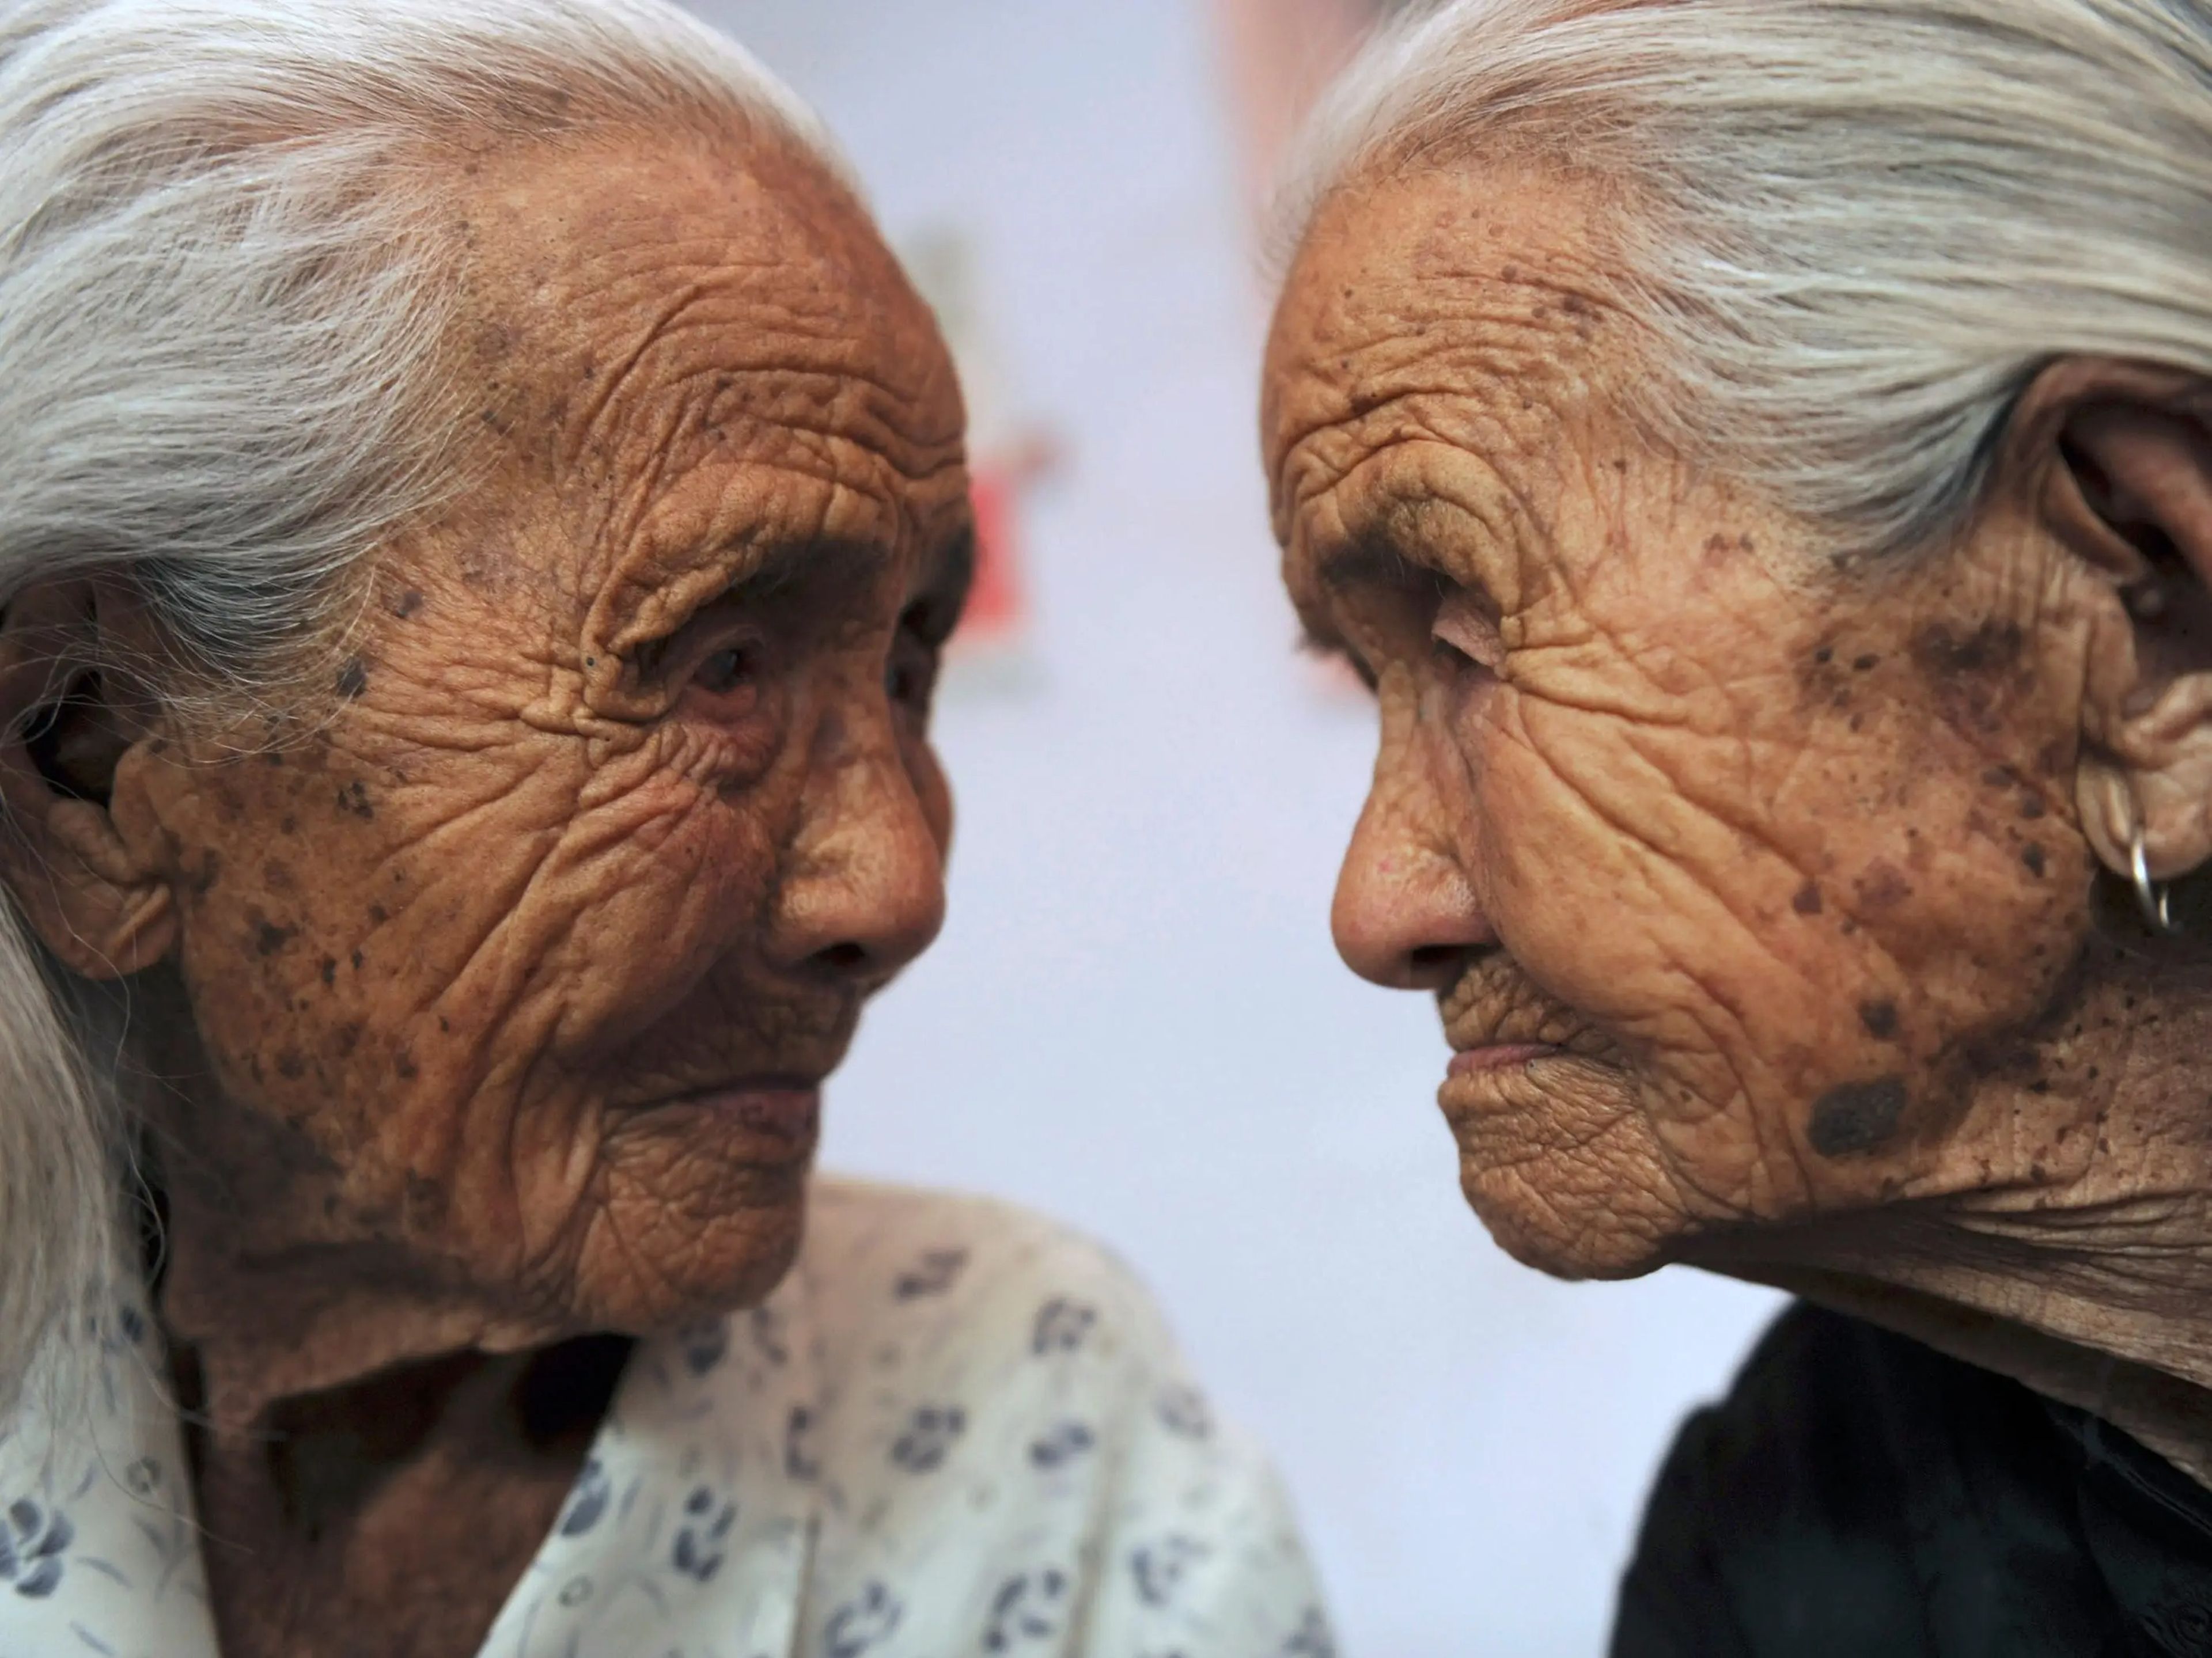 The Chinese twins looking at each other with their faces close together.